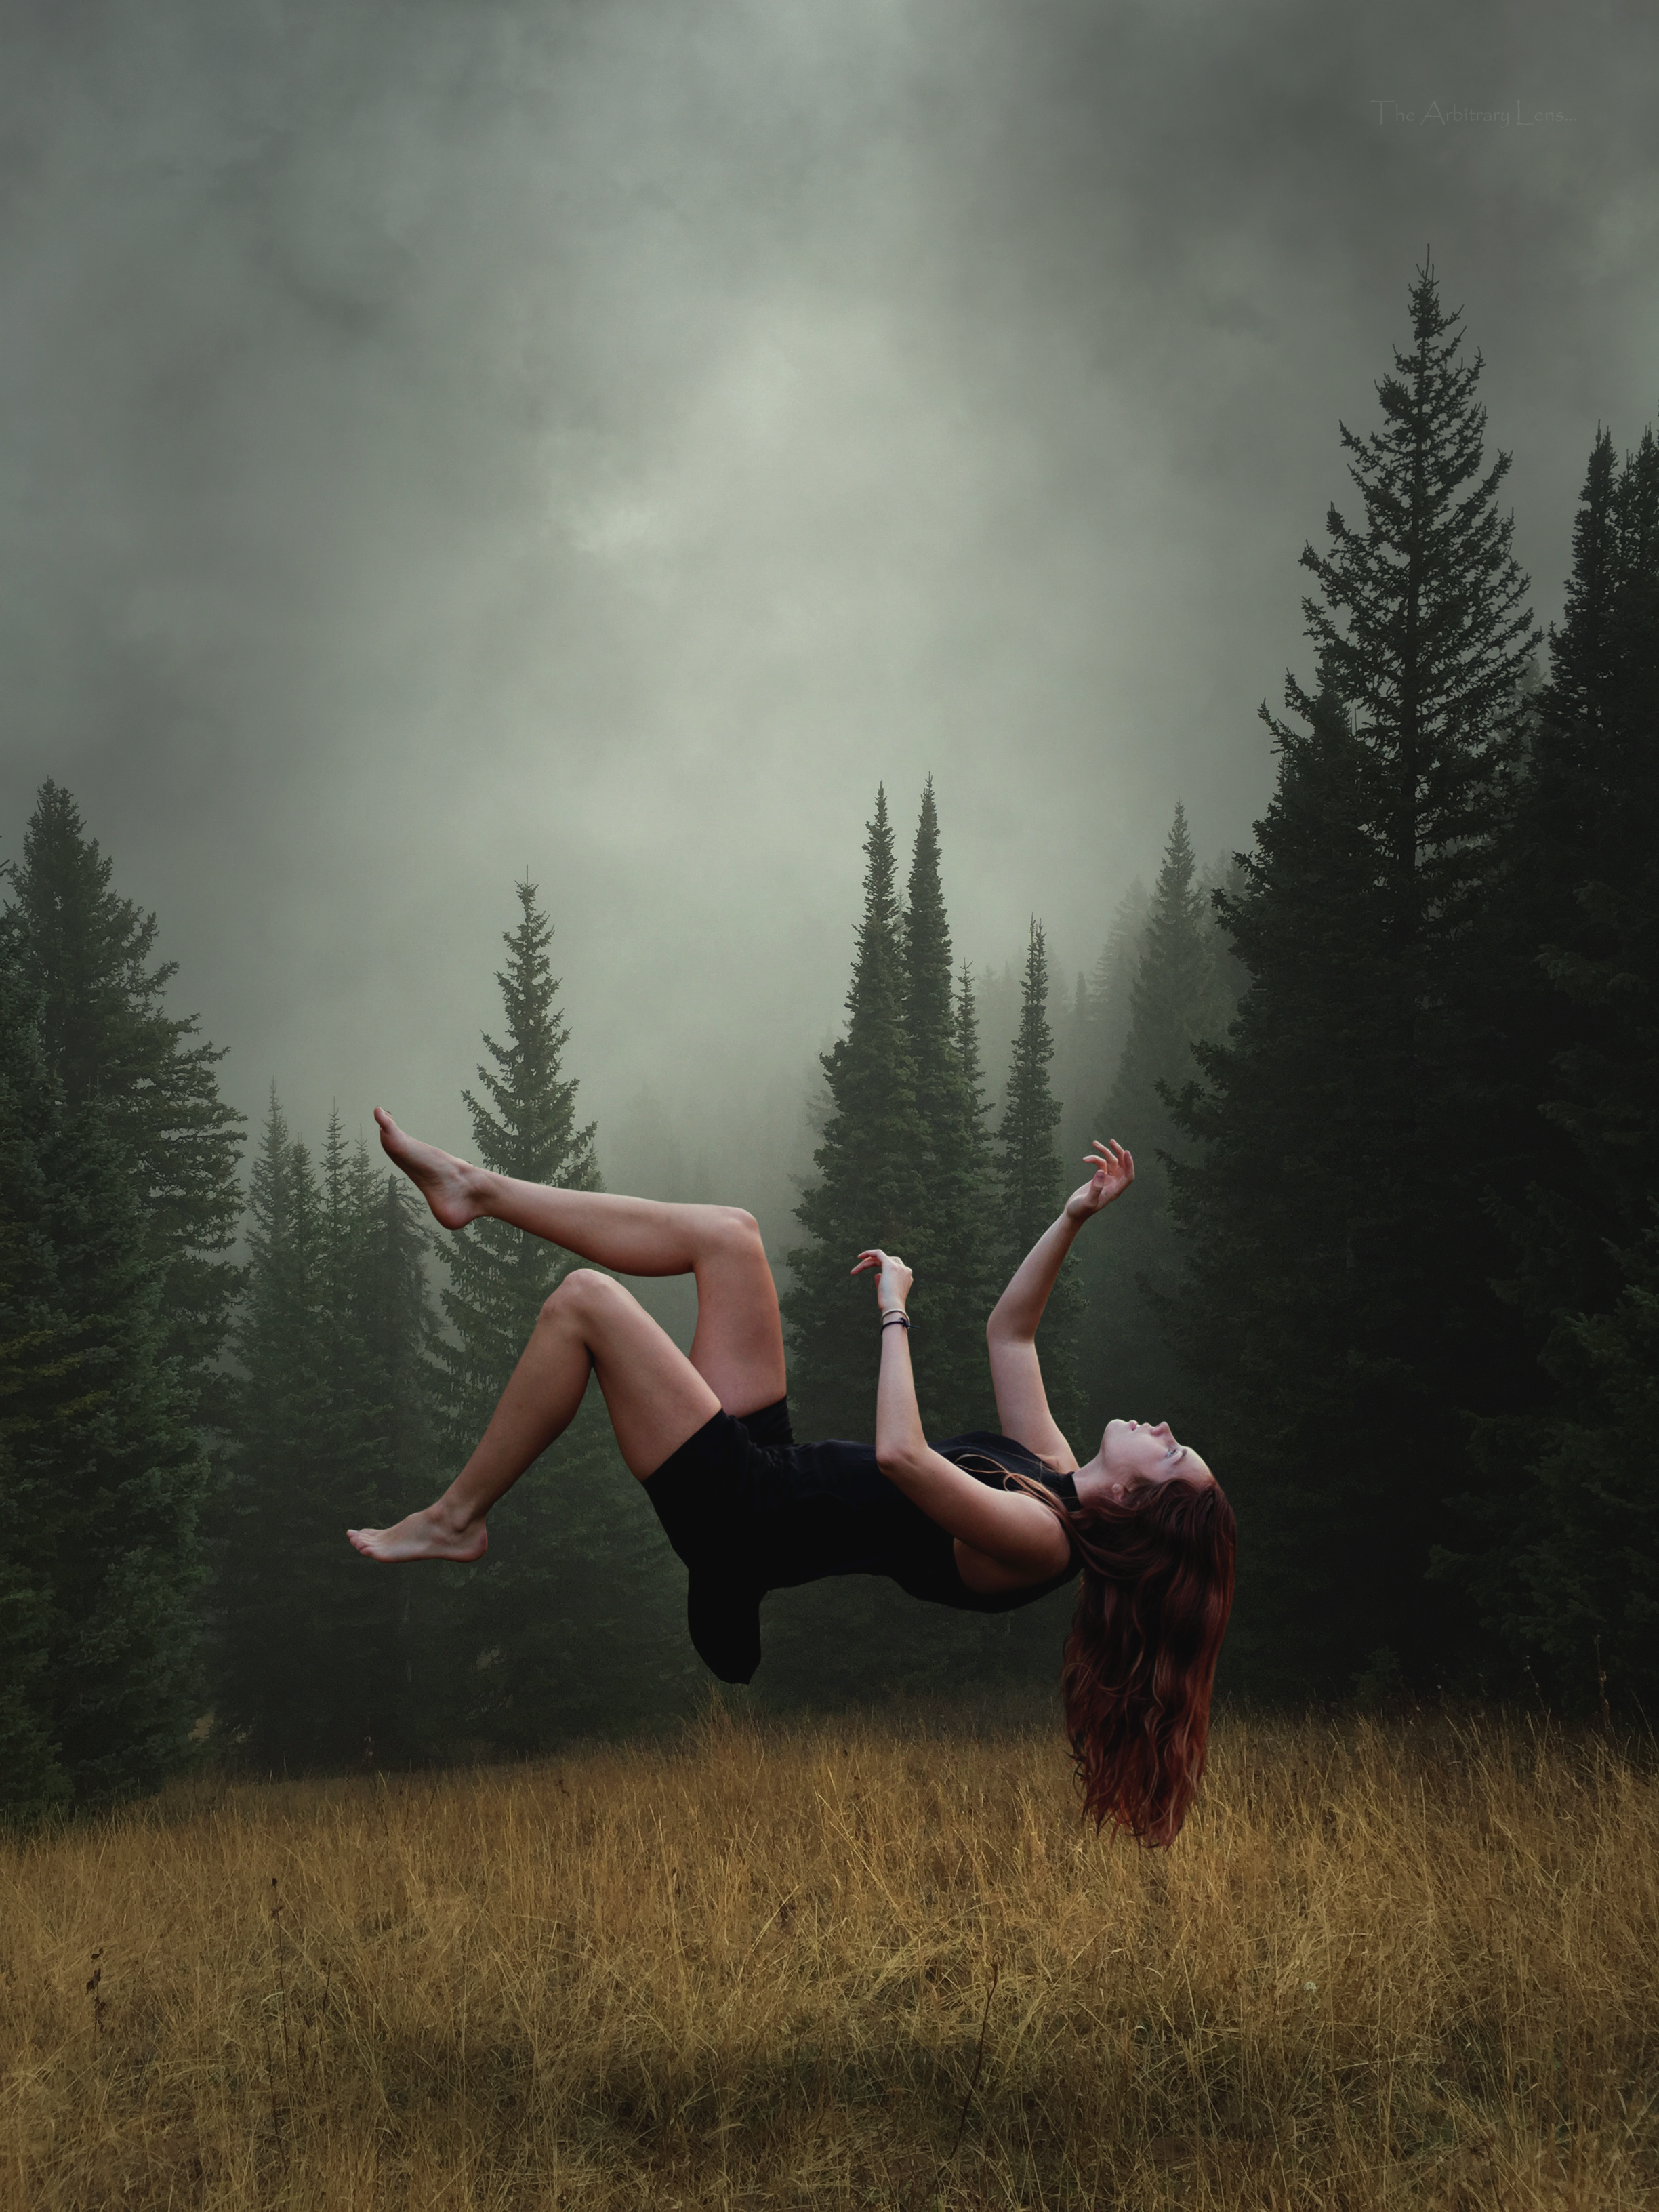 People 2448x3264 fall falling forest nature redhead clouds portrait display women